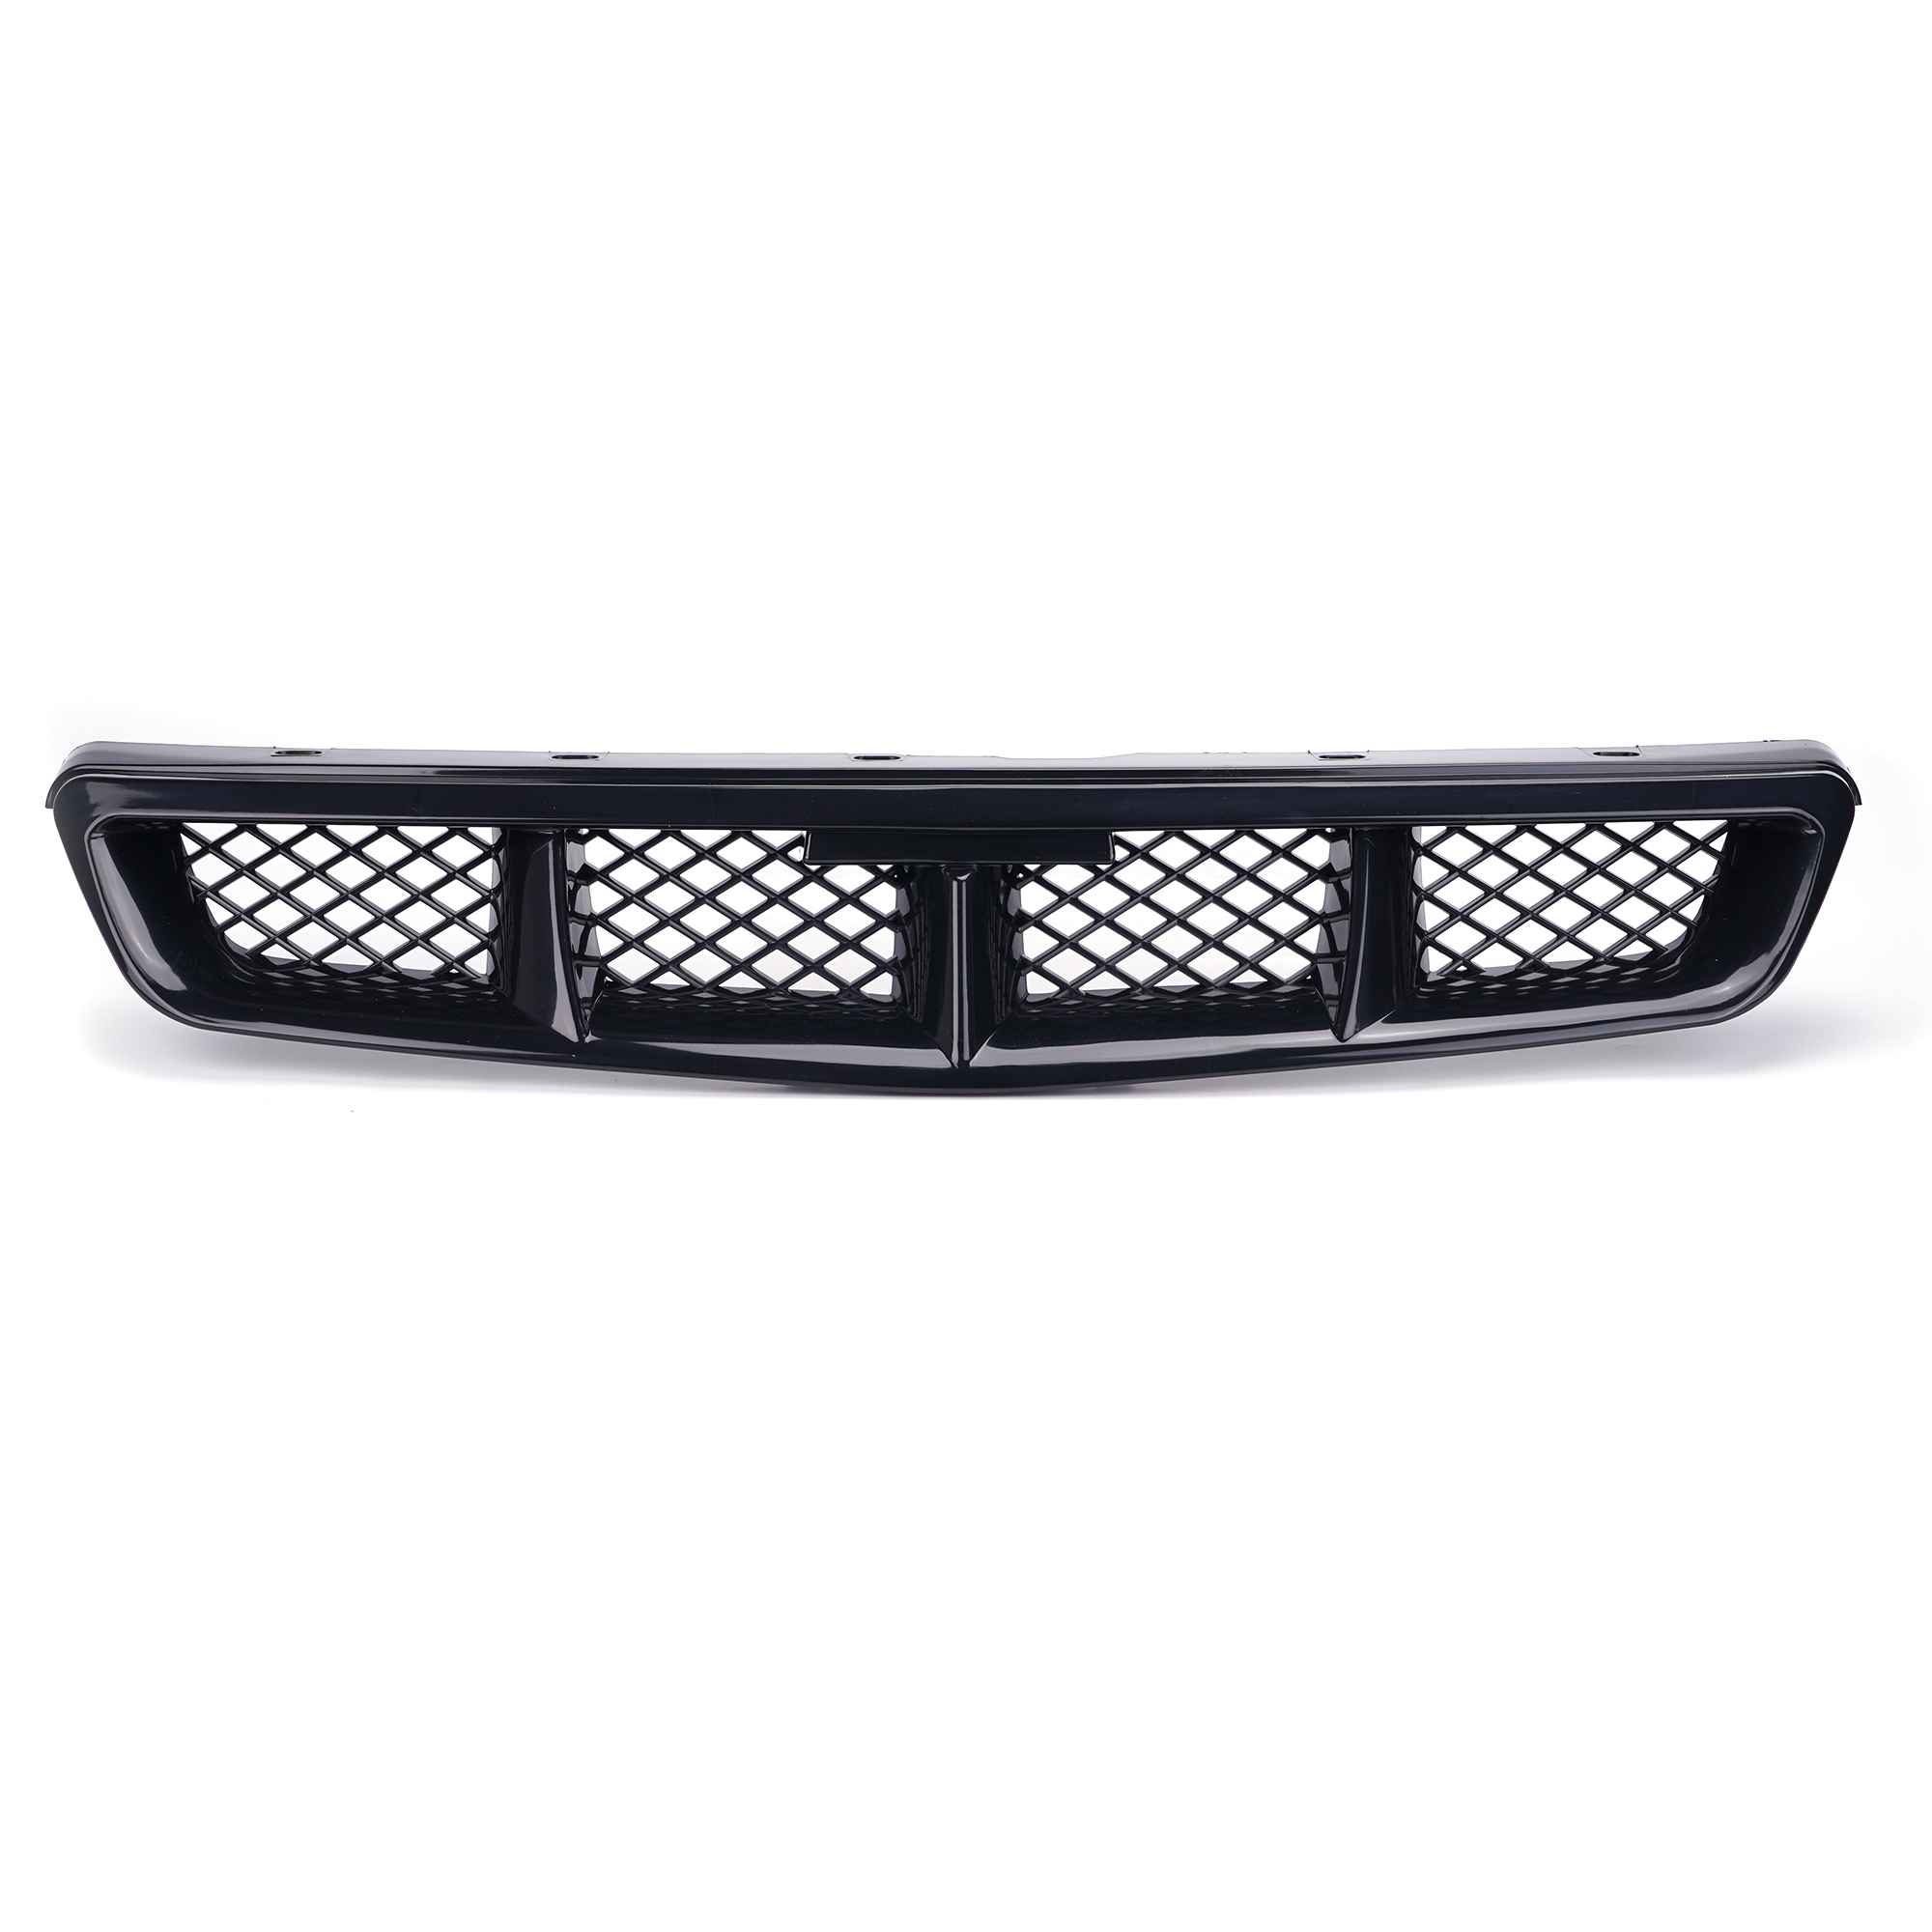 GRILLE  FOR HONDA CIVIC 1996